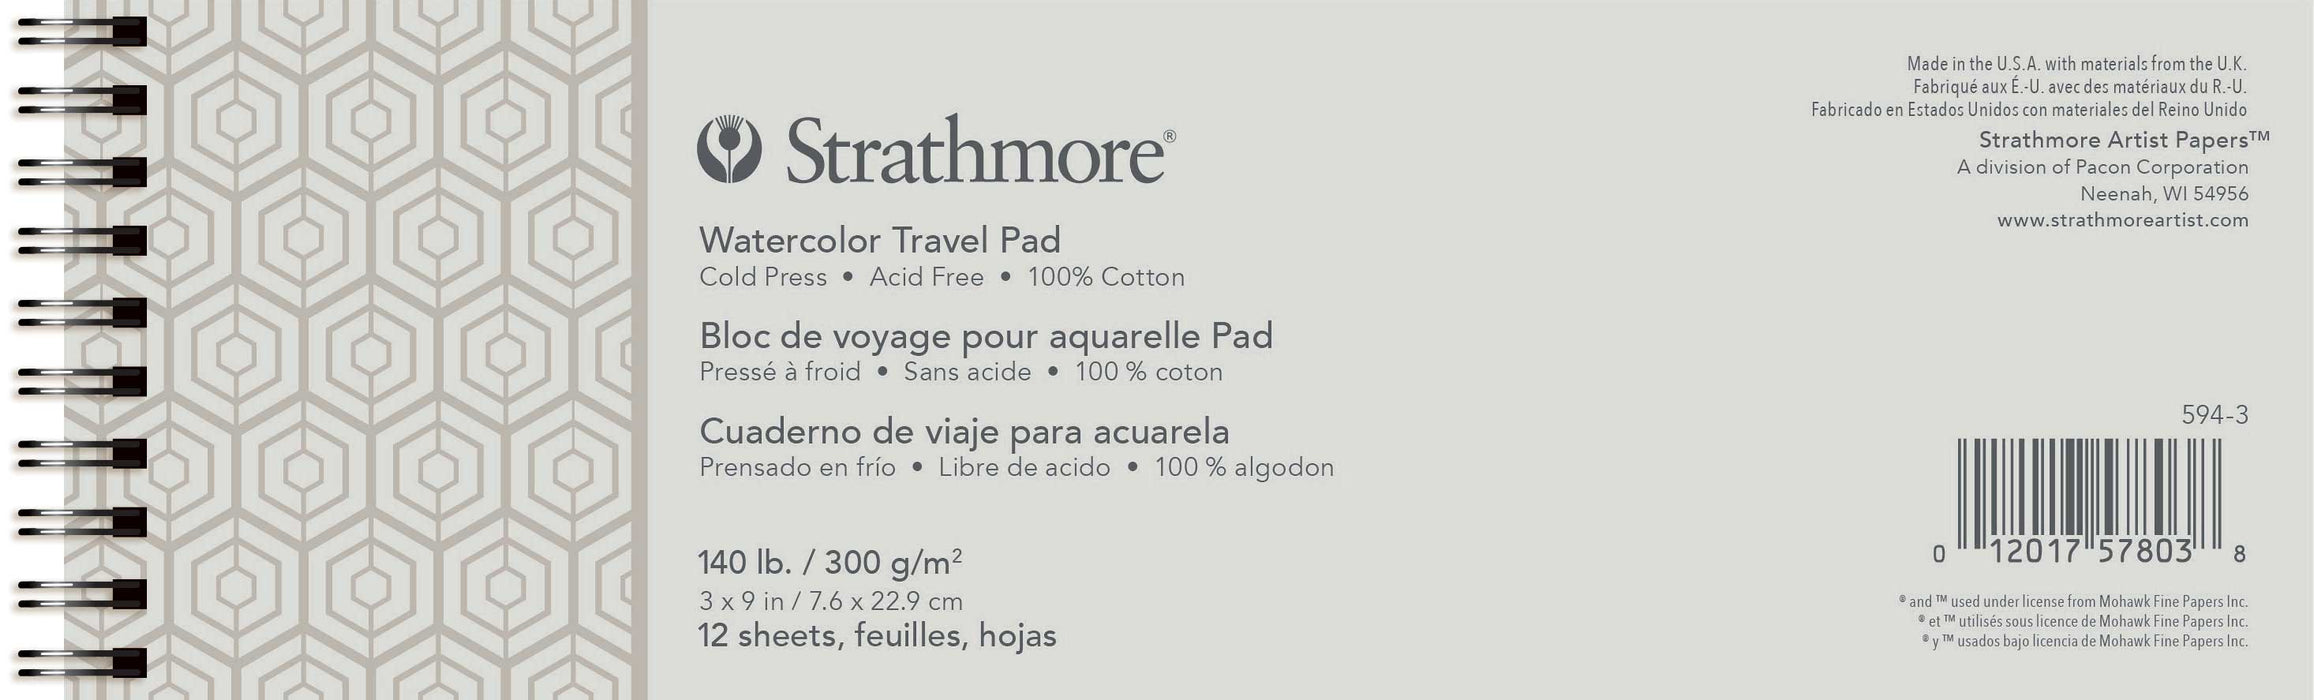 Strathmore Travel Series Watercolour Journals